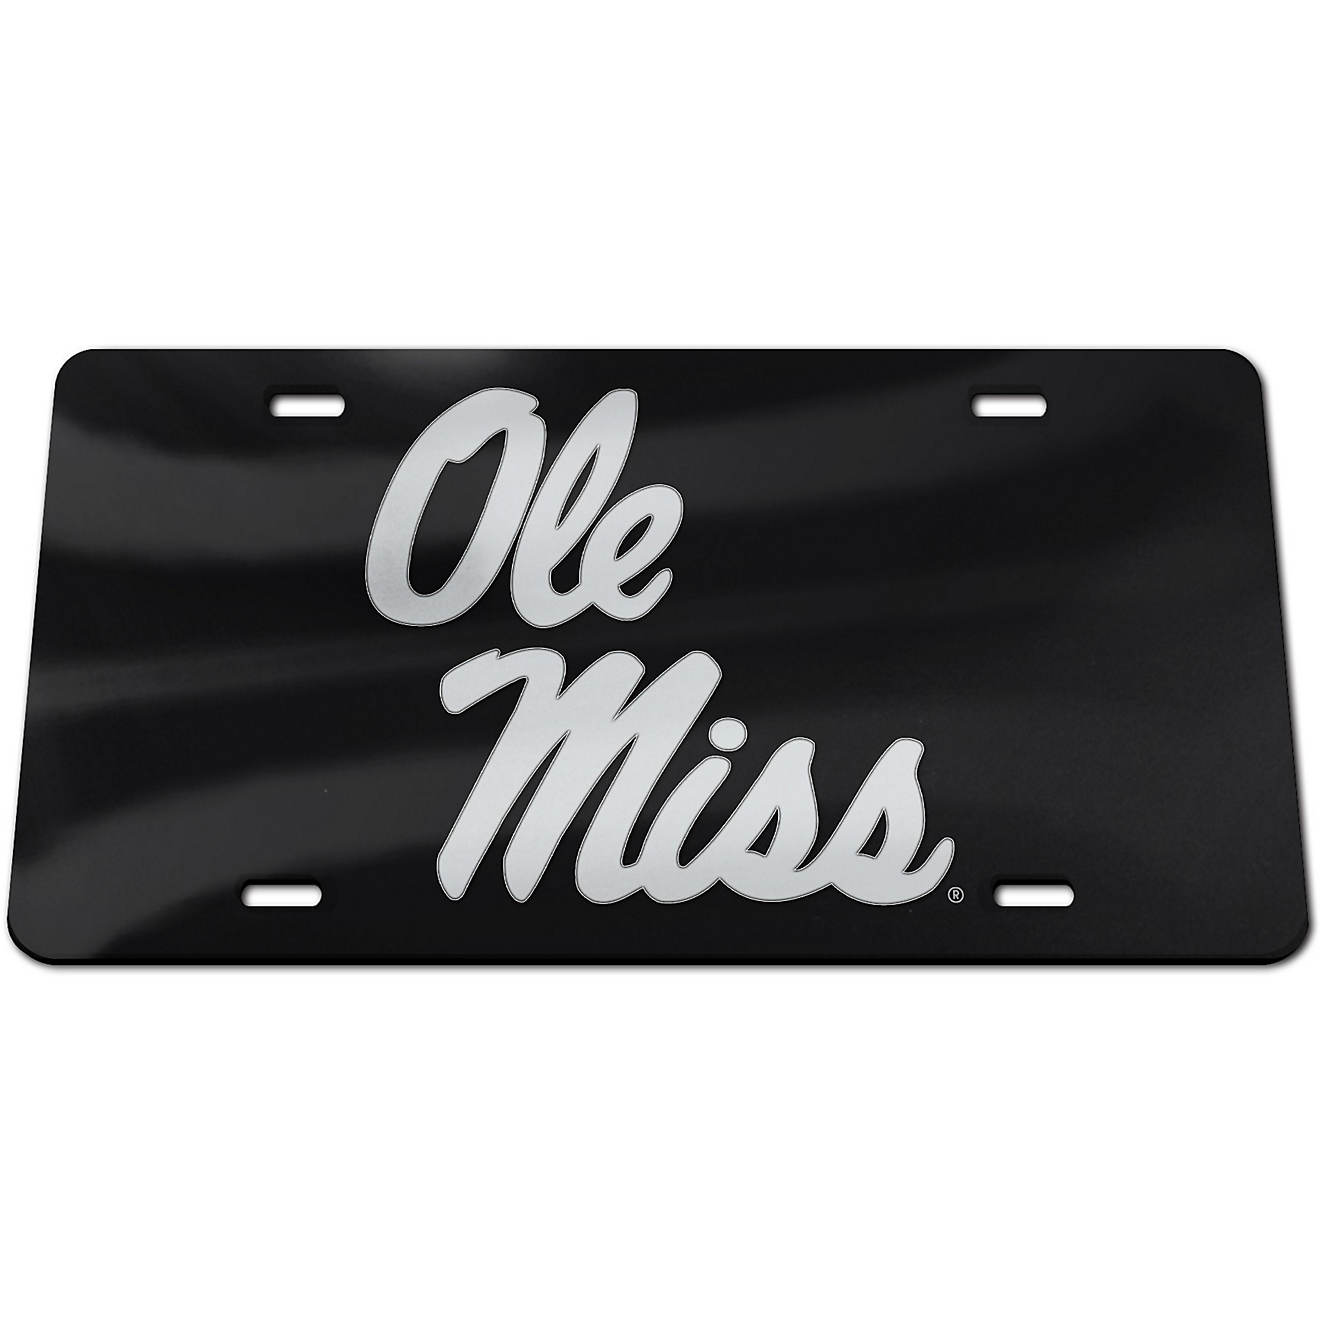 WinCraft University of Mississippi Blackout License Plate                                                                        - view number 1